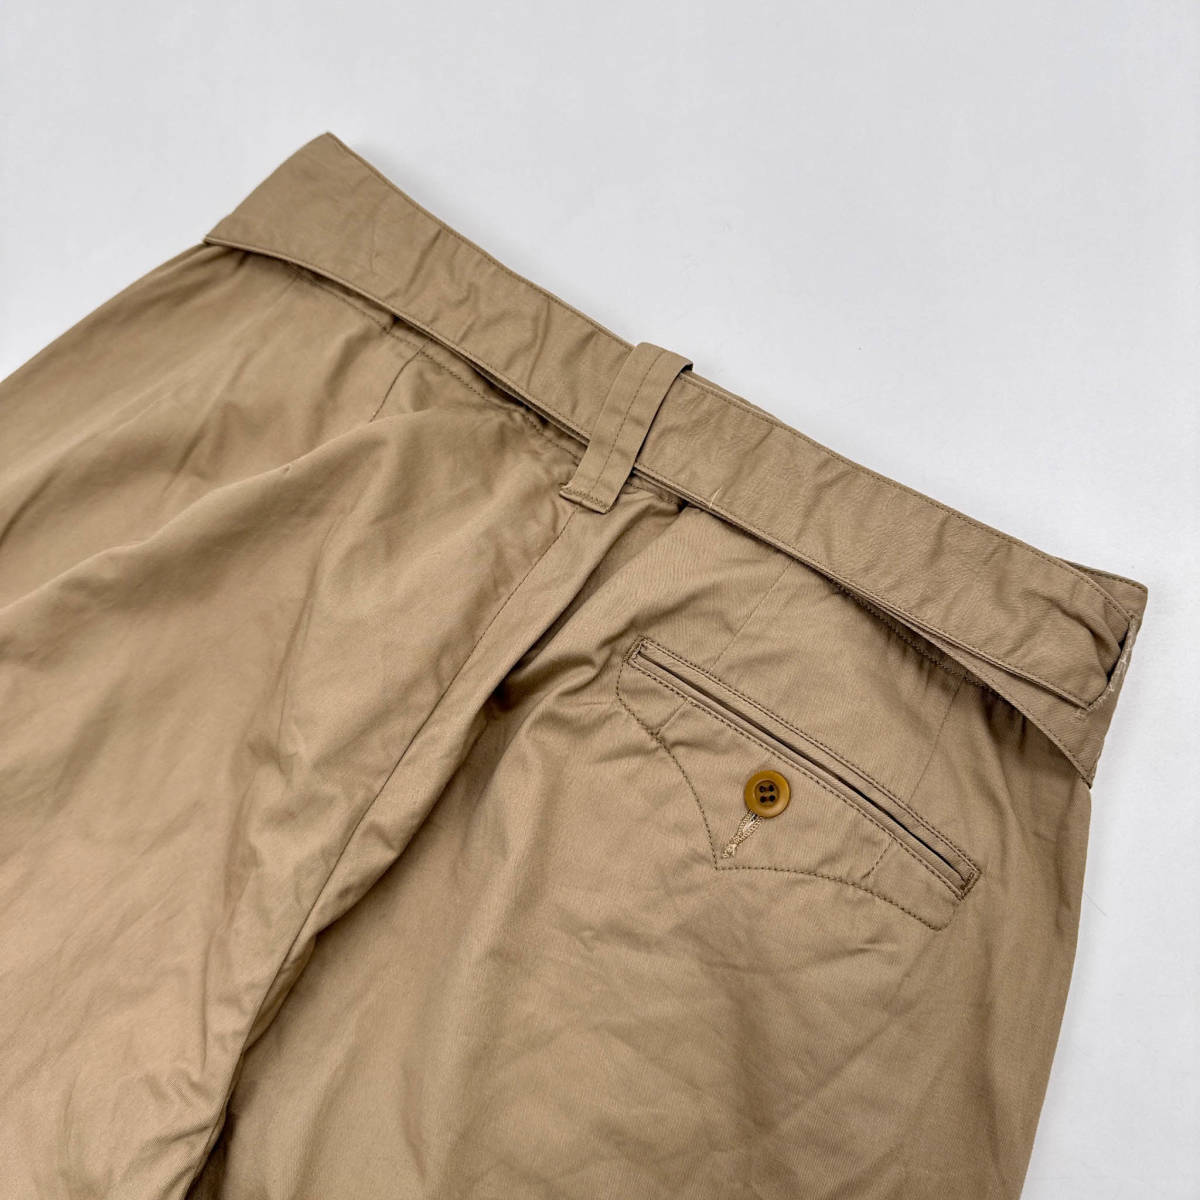 HAVERSACK Haversack bell tedo wide tapered pants size M / beige / chinos / made in Japan / men's / belt attaching 